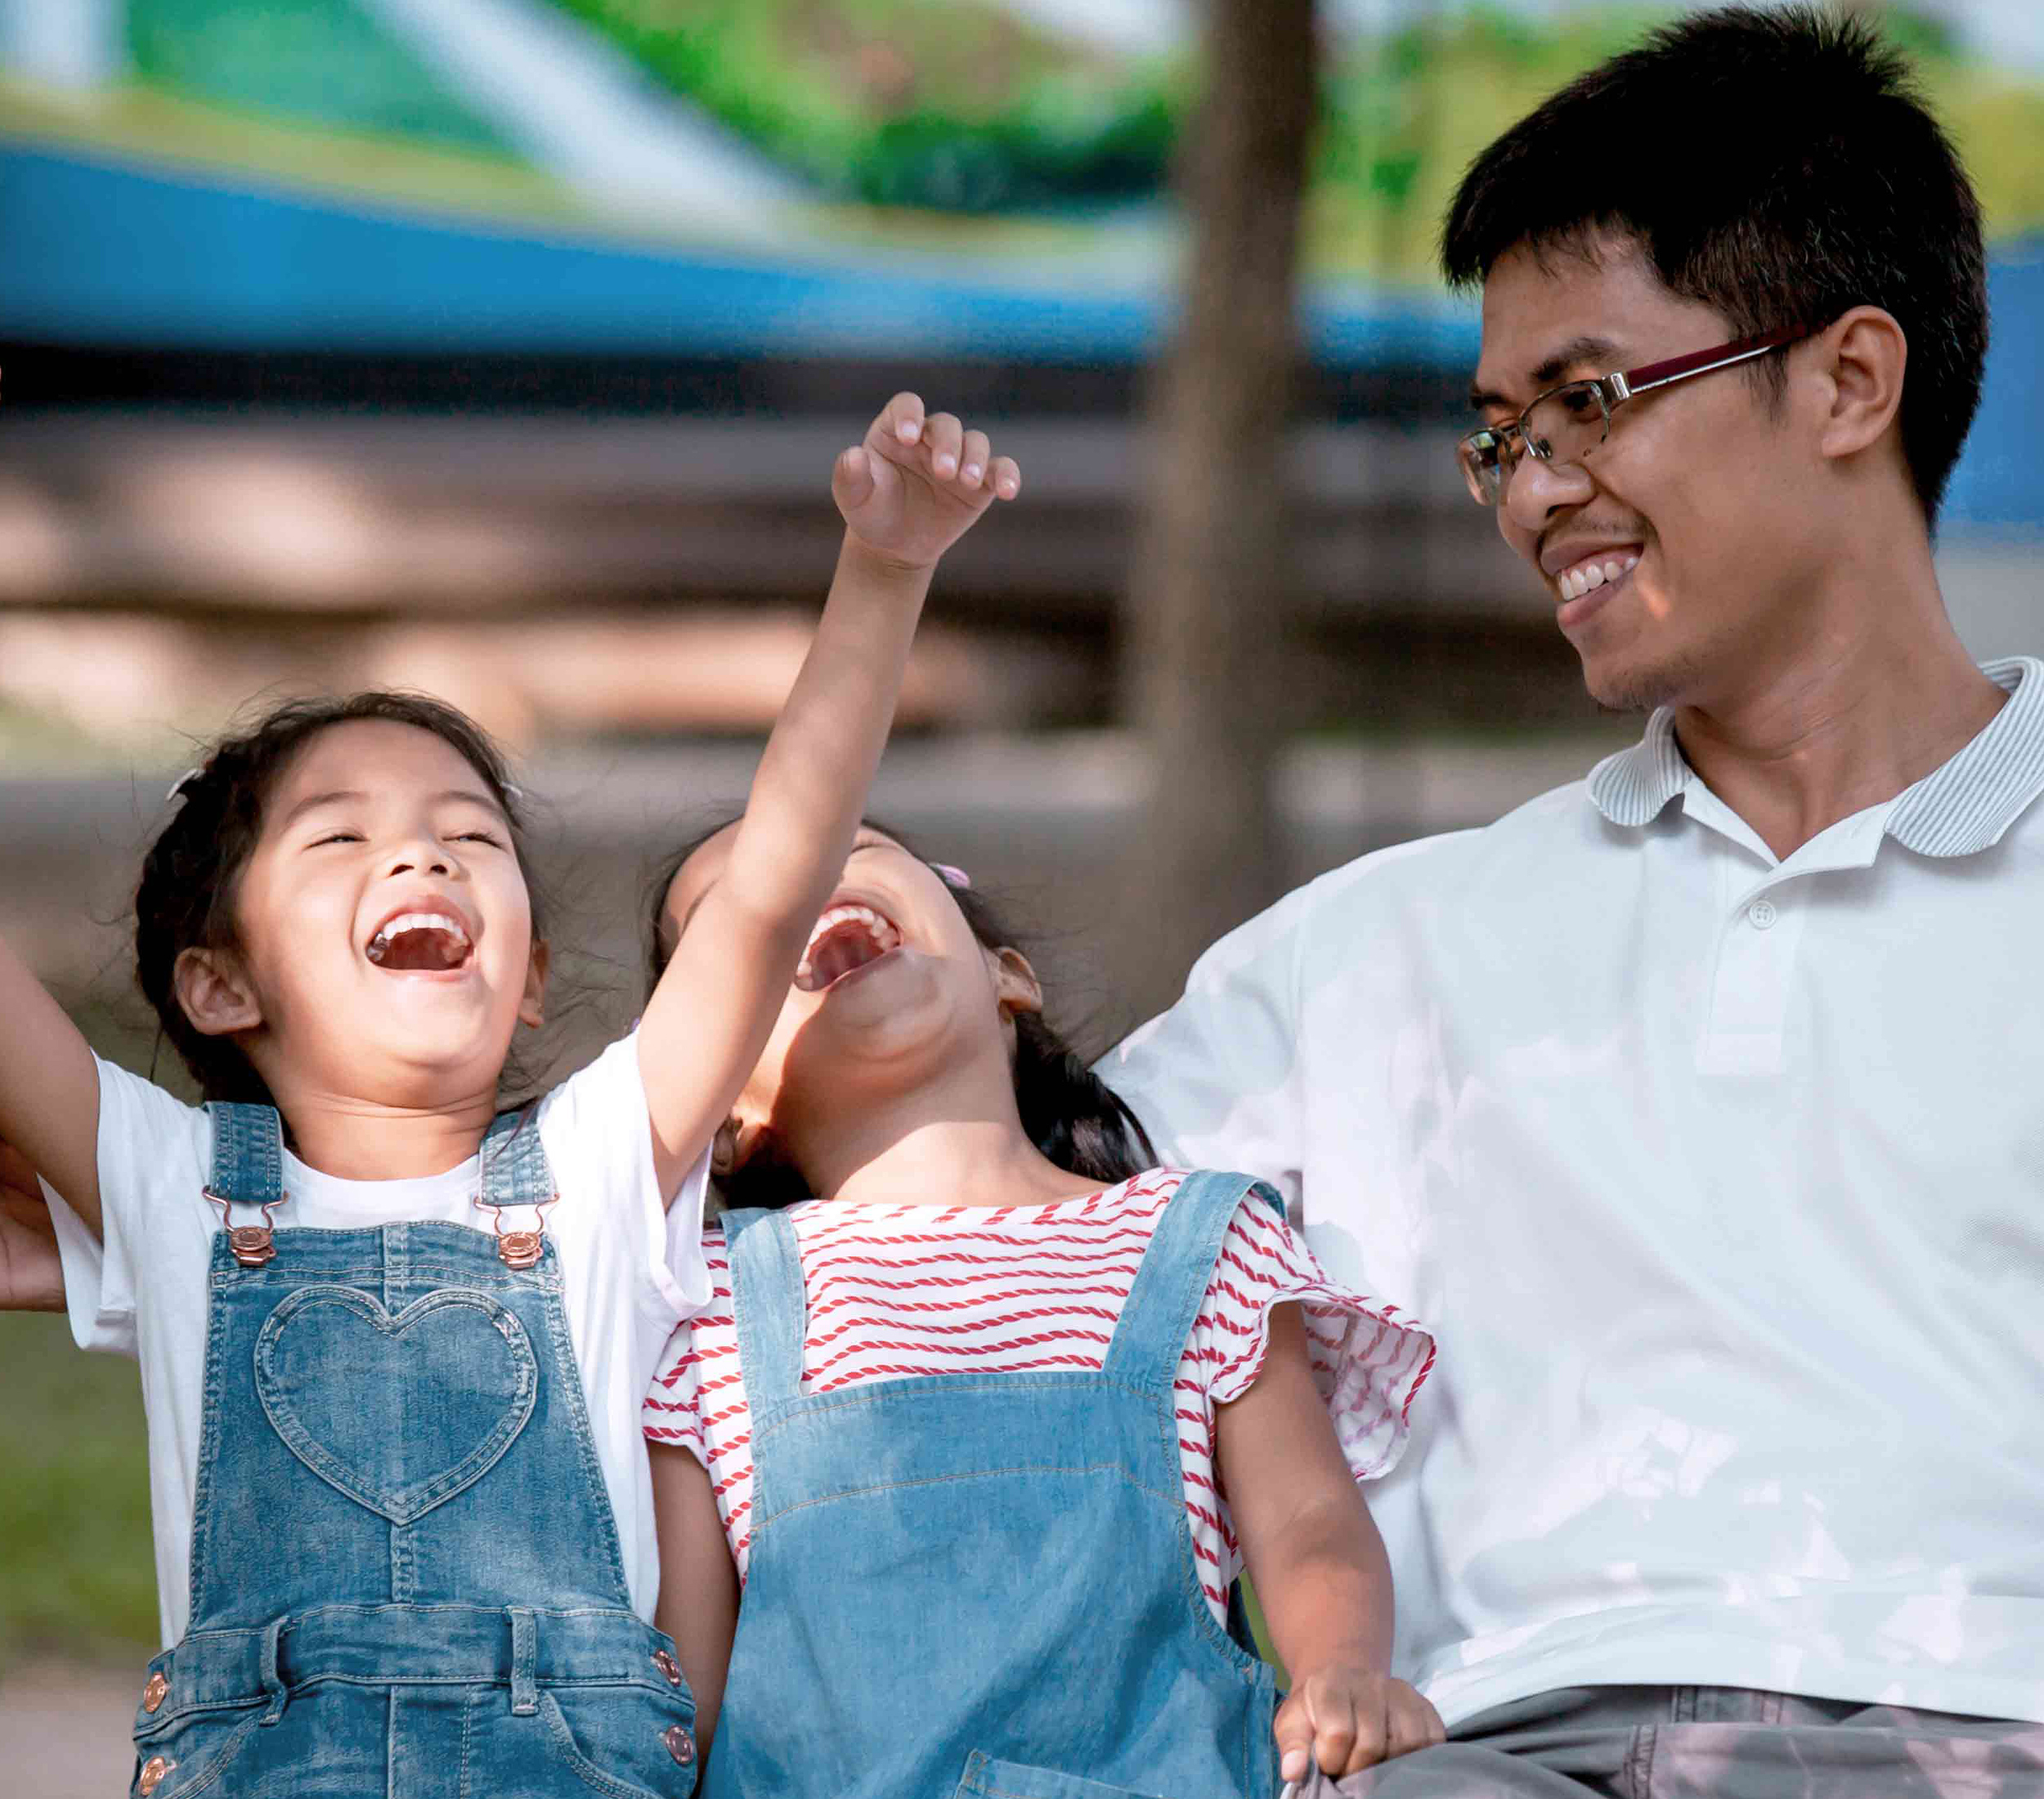 Man and his two daughters laughing and cheering on a bench